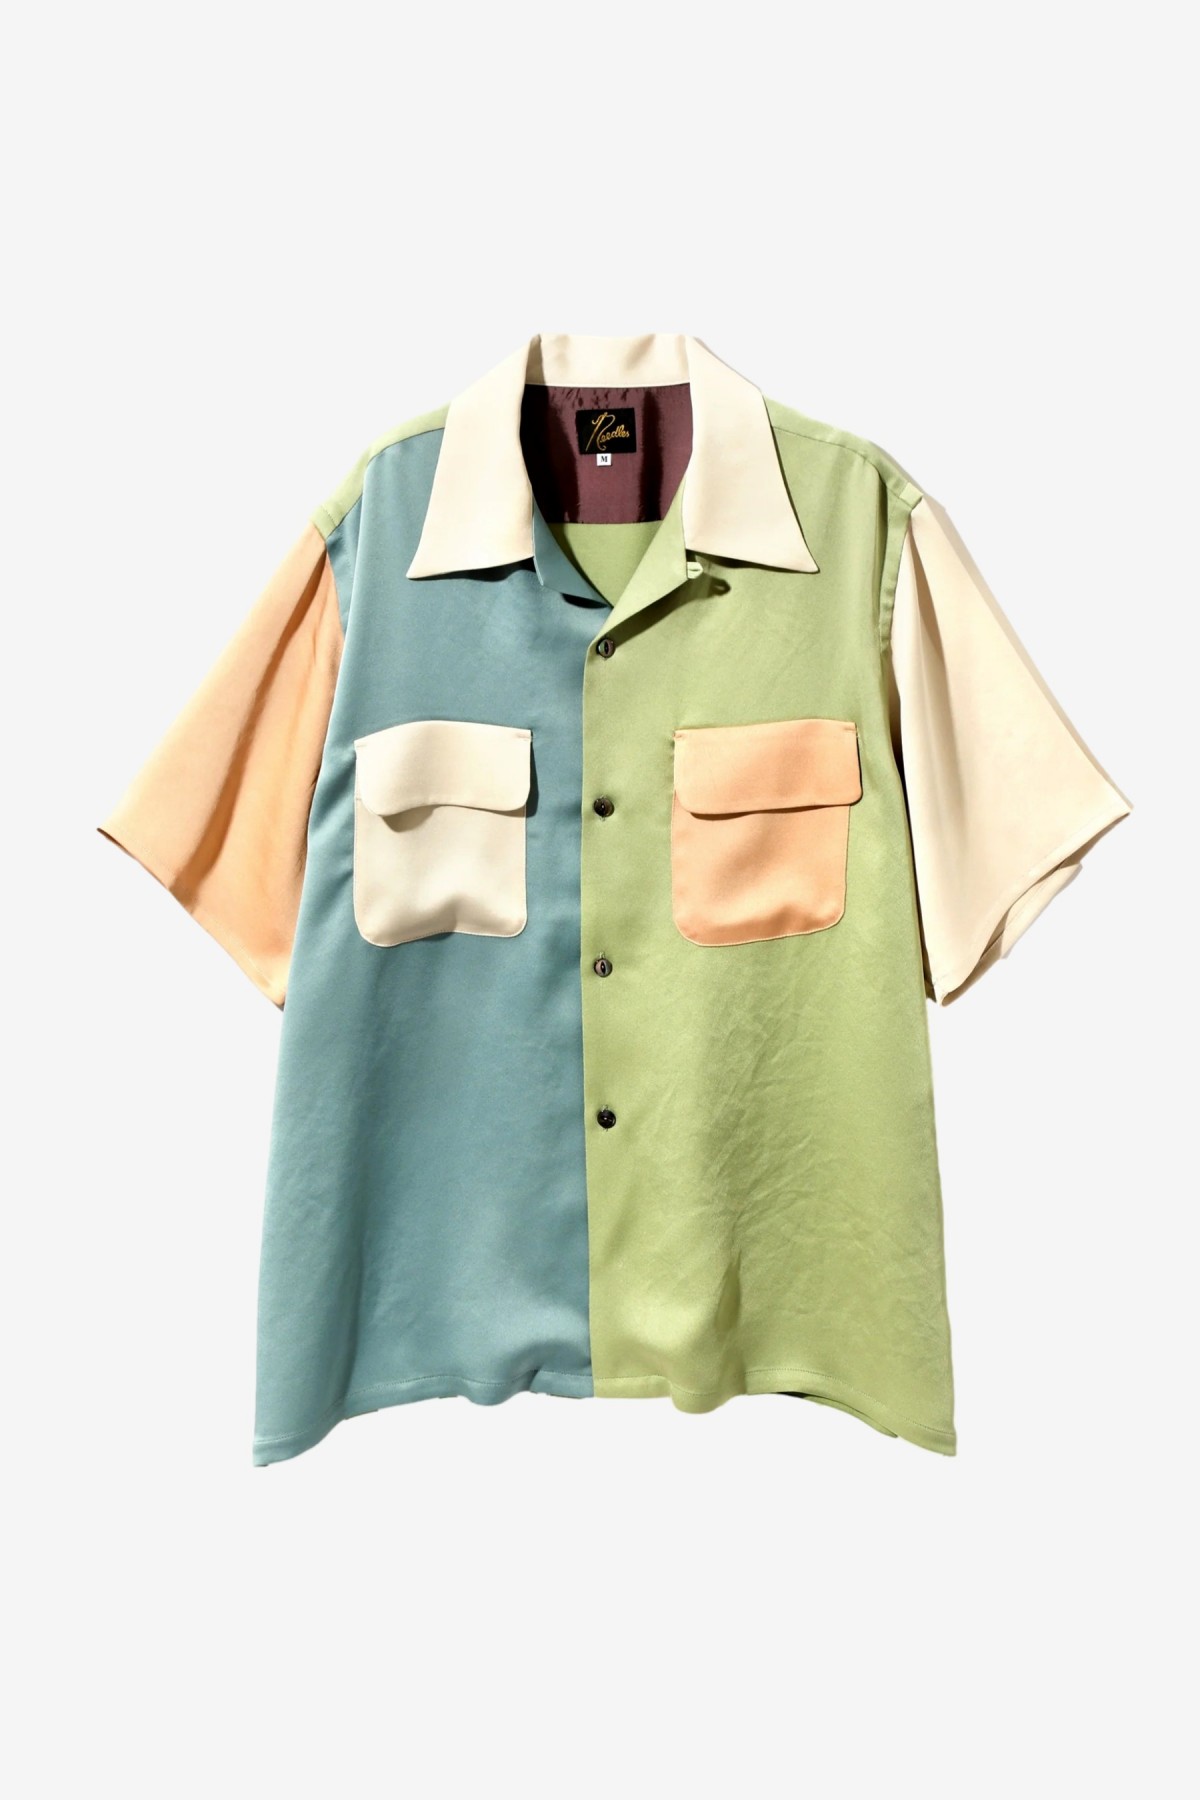 Needles S/S Classic Shirt Poly Sateen in Light Tone